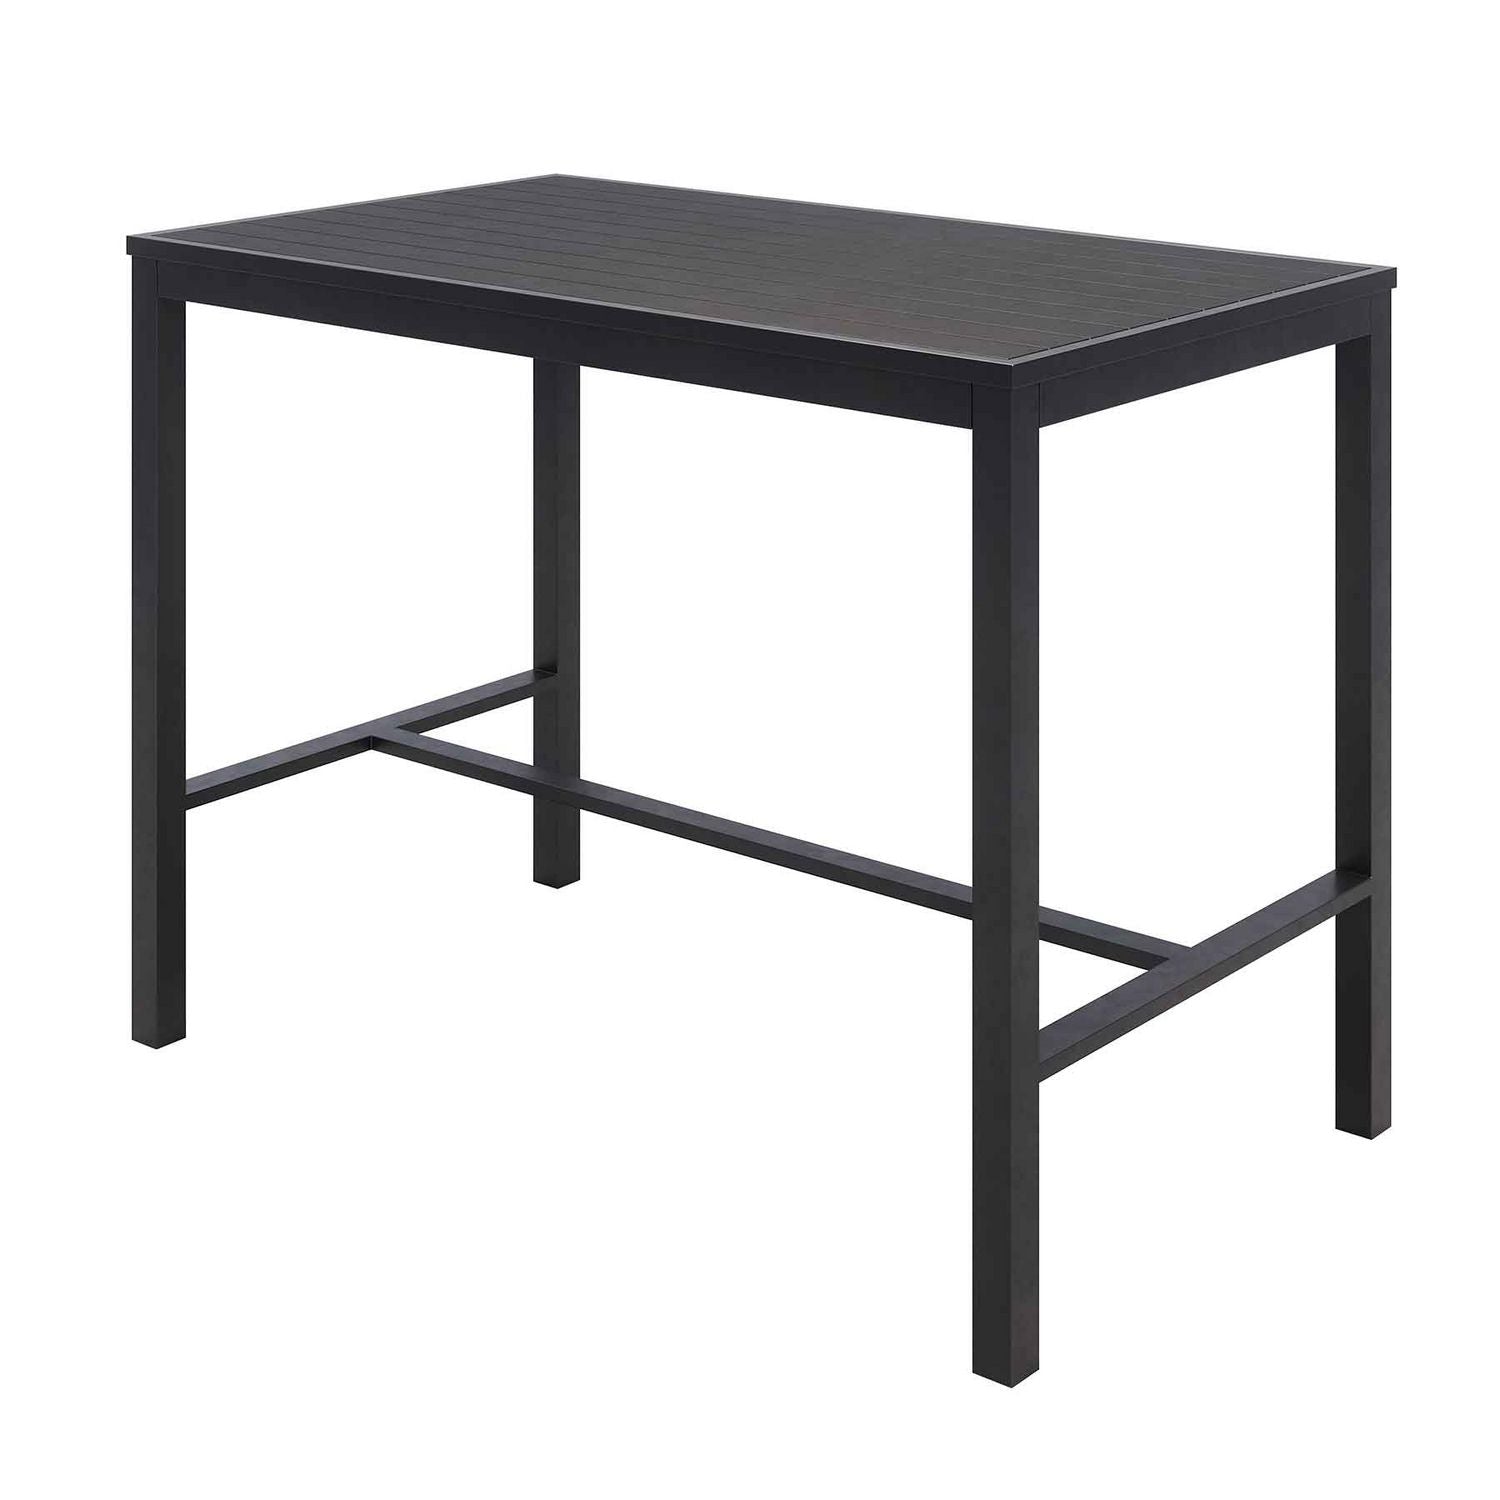 eveleen-outdoor-bistro-patio-table-with-four-black-powder-coated-polymer-barstools-32-x-55-black-ships-in-4-6-bus-days_kfi840031925213 - 2